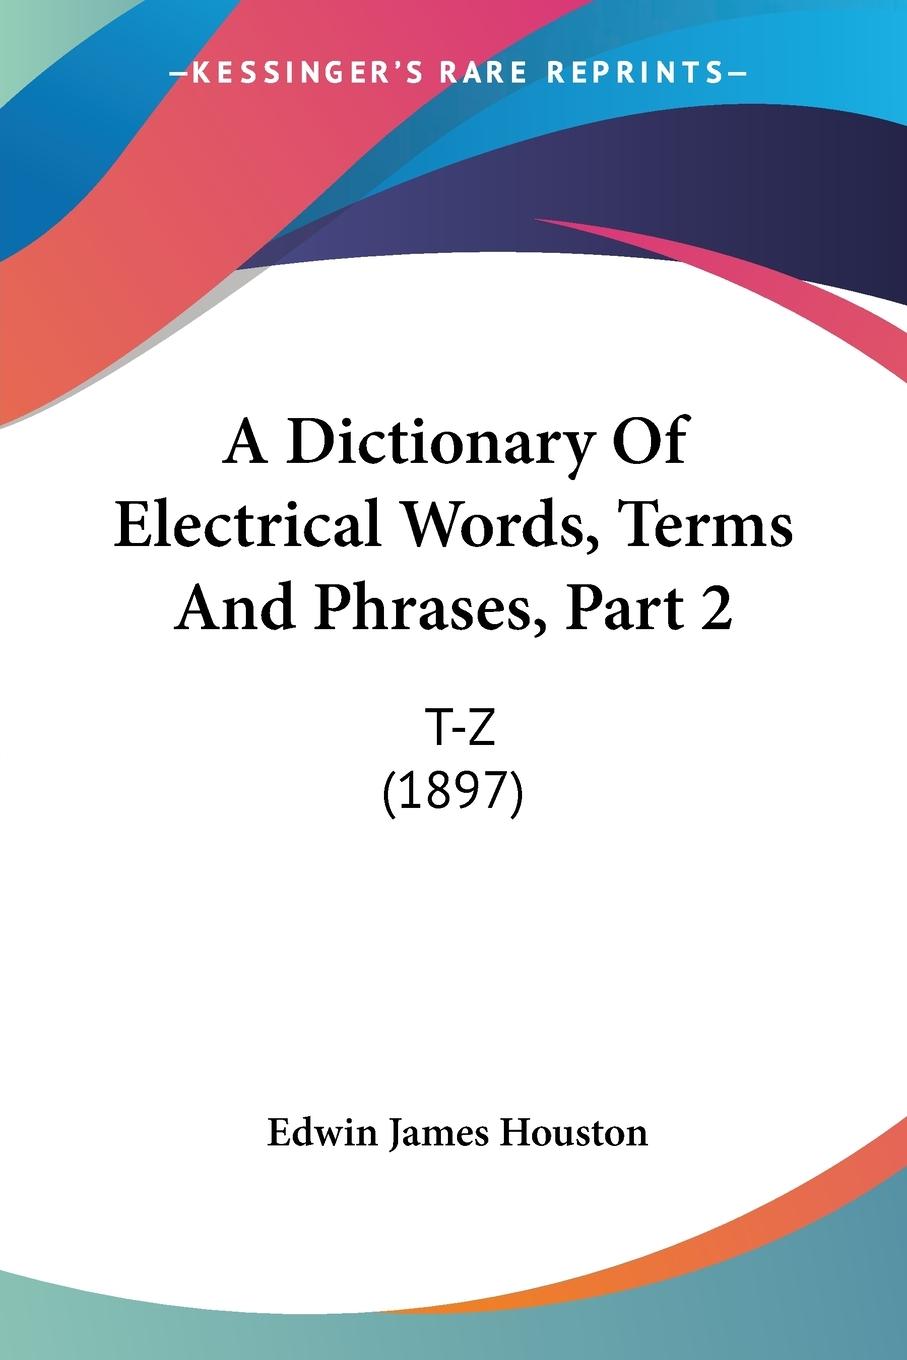 A Dictionary Of Electrical Words, Terms And Phrases, Part 2 - Houston, Edwin James